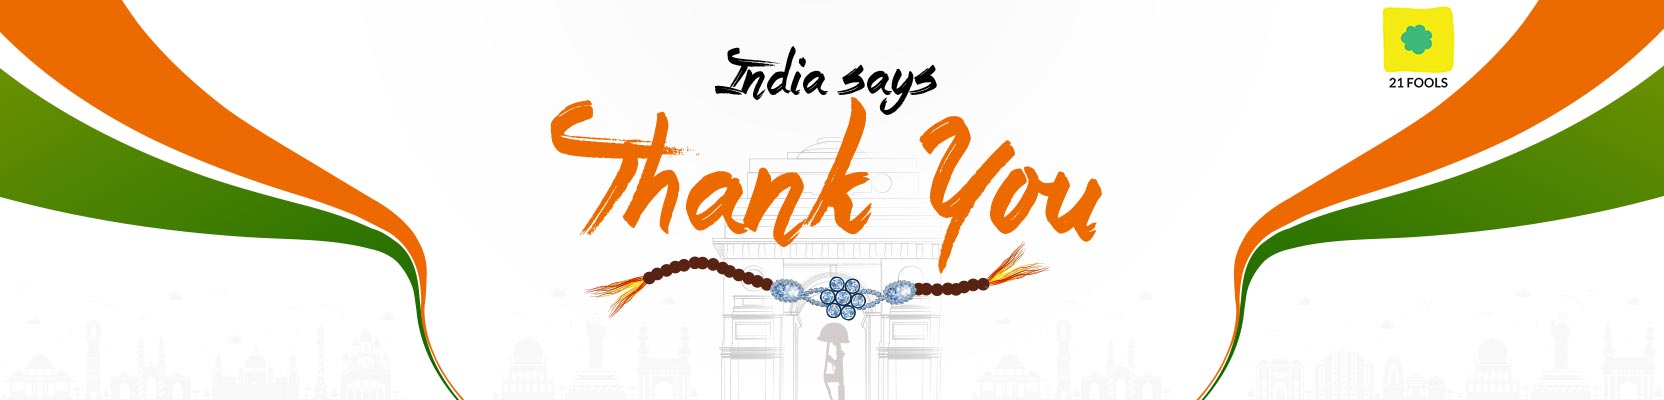 send-thank-you-cards-for-soldiers-in-the-indian-army-navy